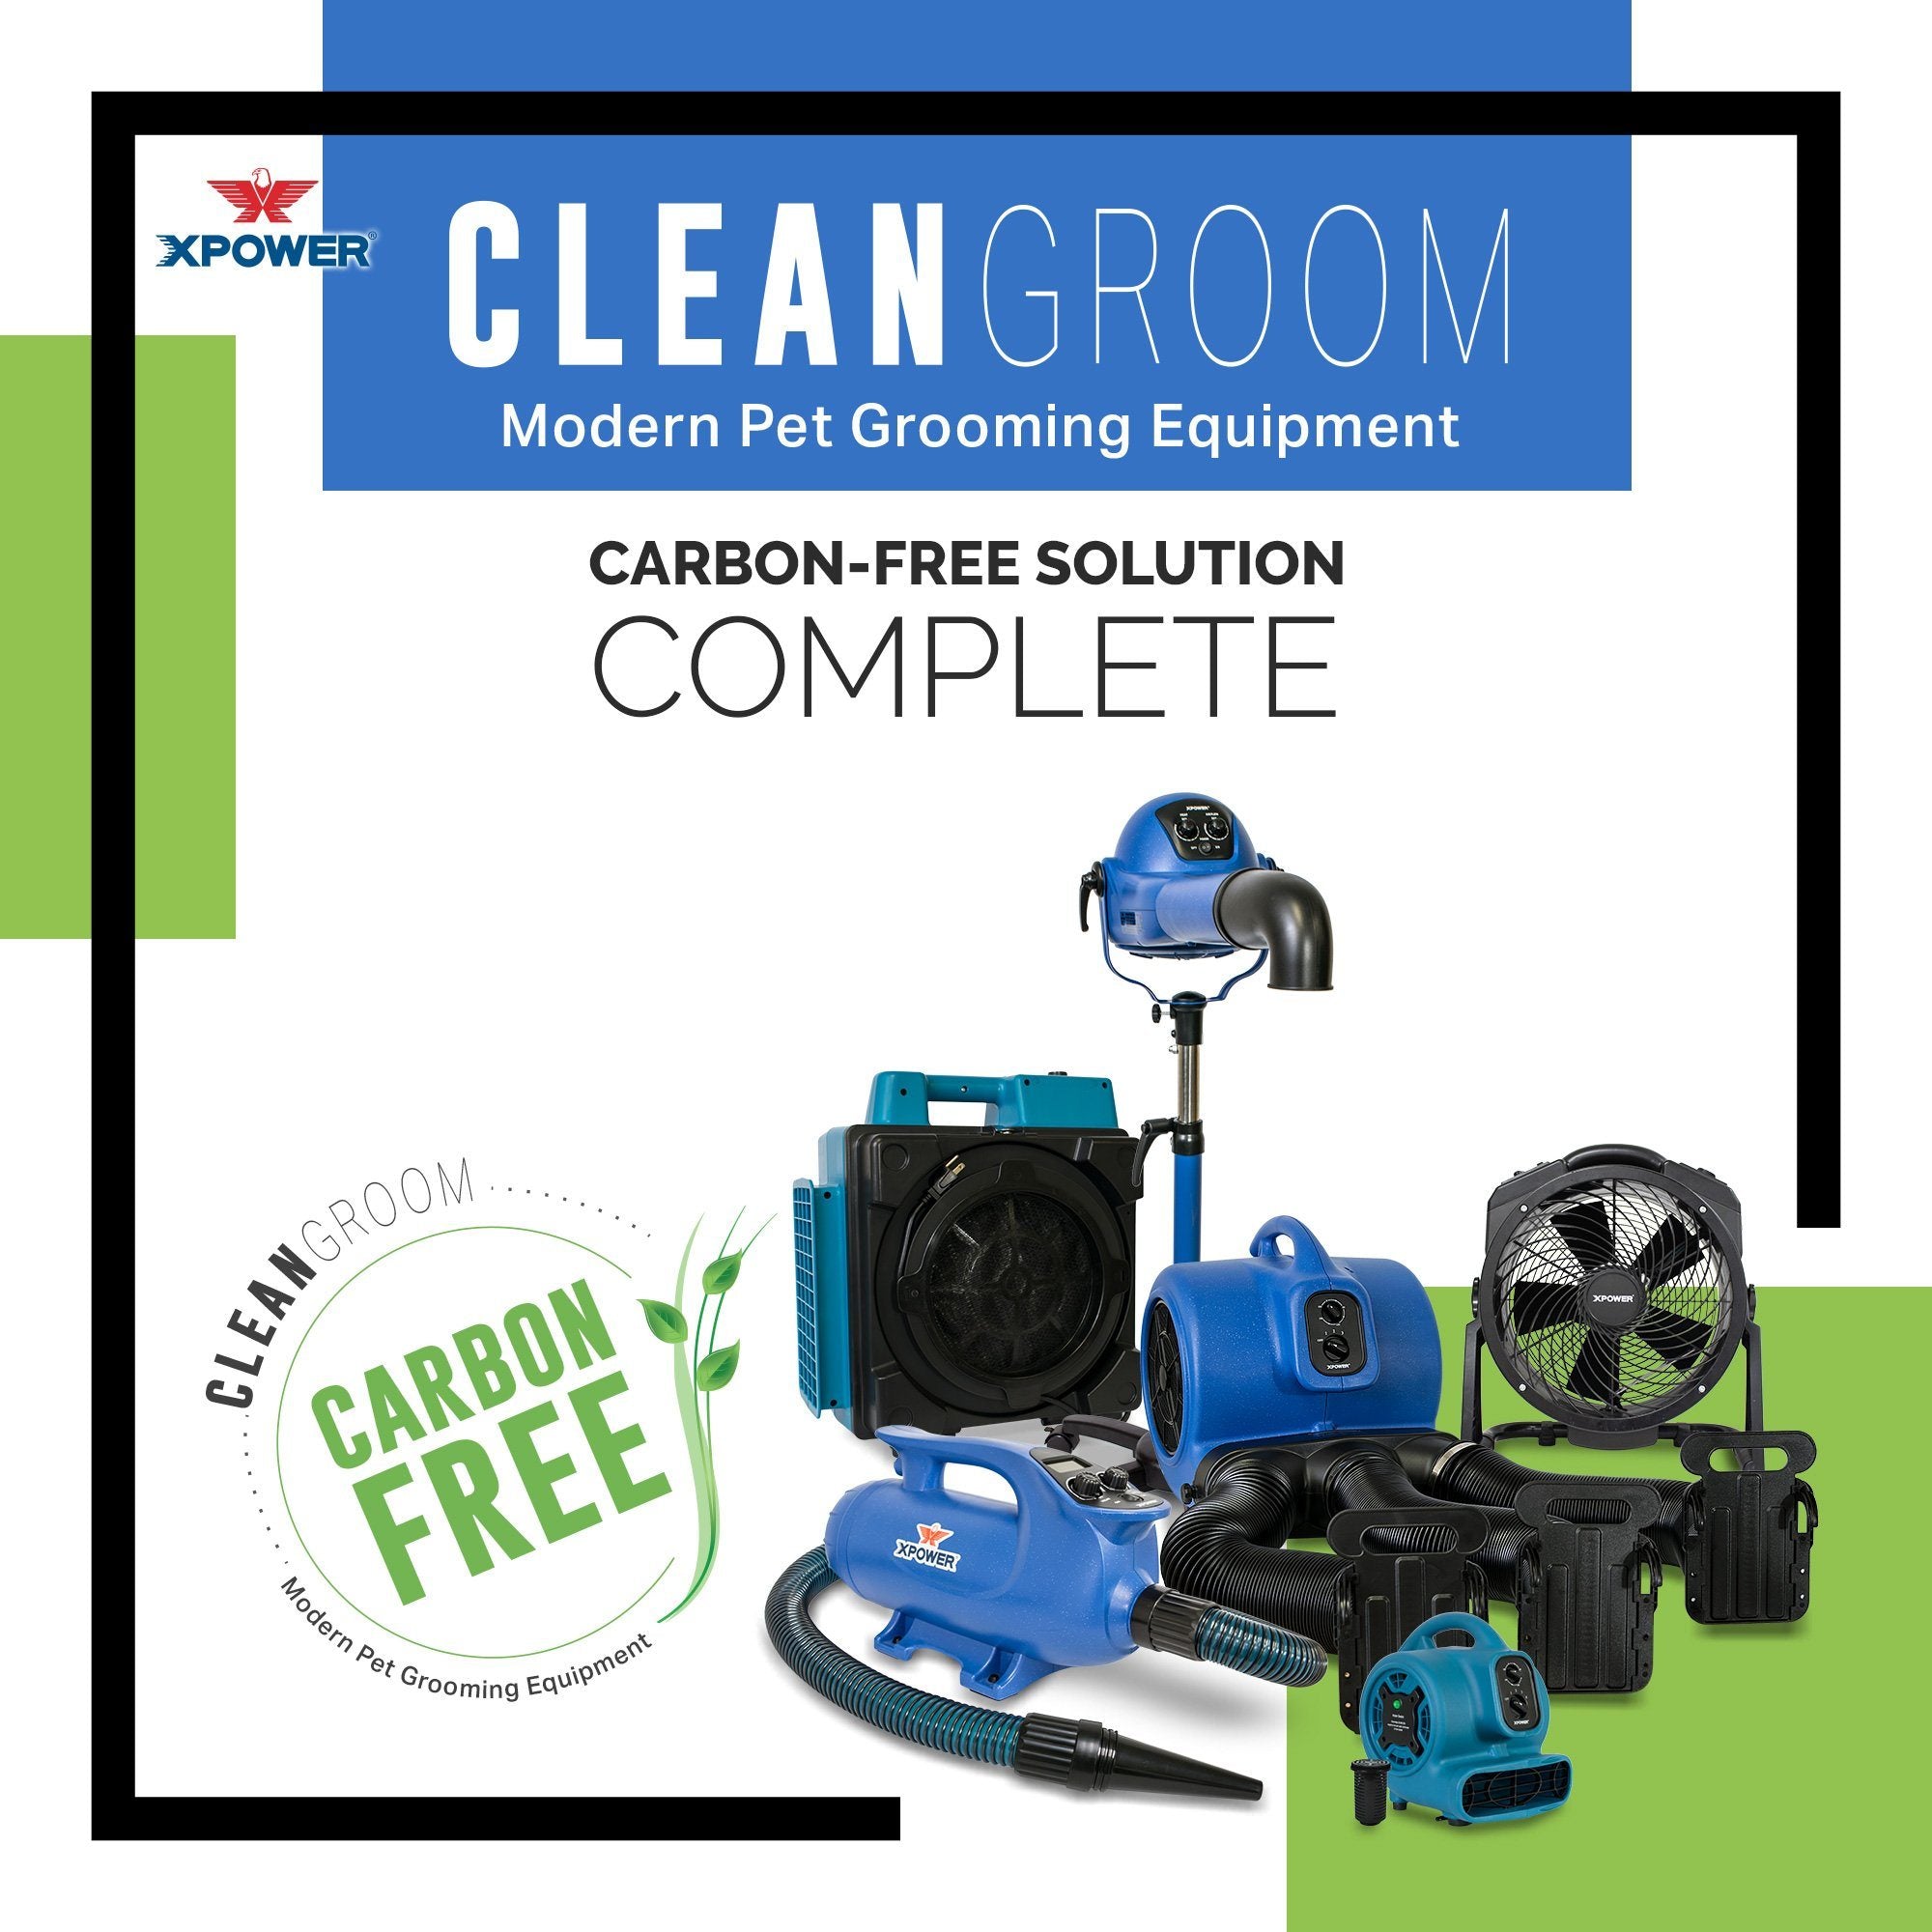 XPOWER CleanGroom Carbon-Free Solution